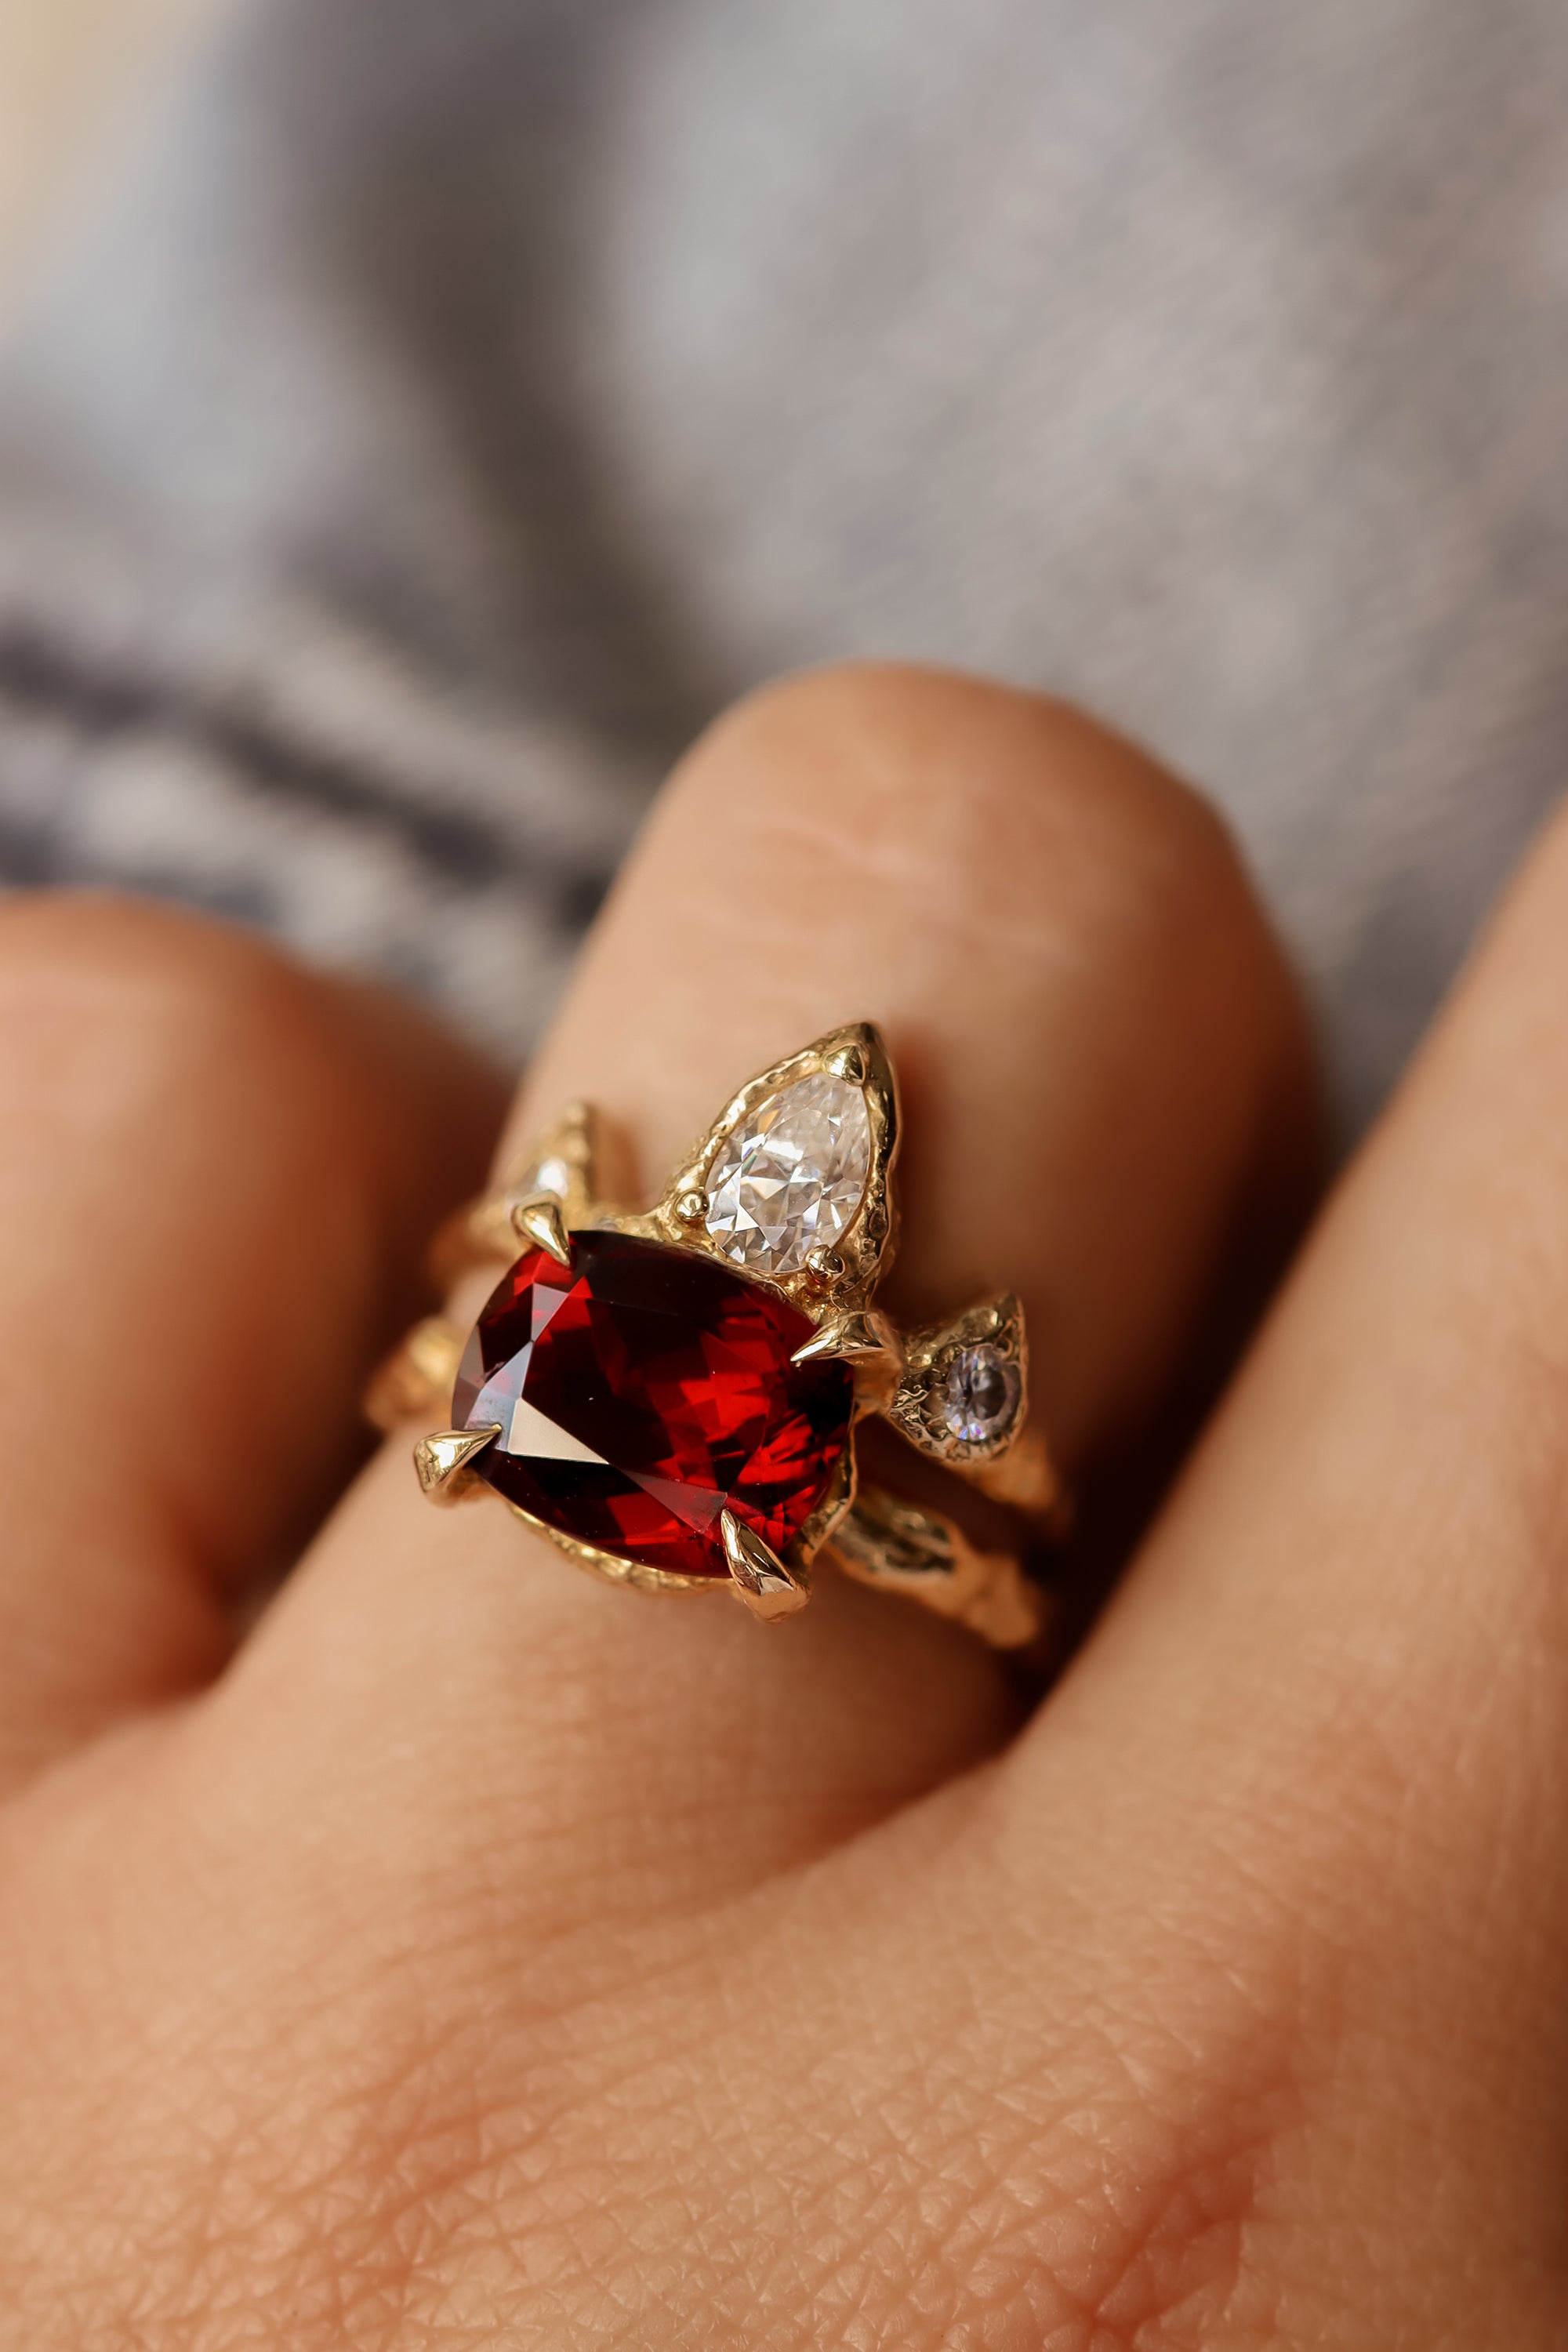 Shades of Red and Gold: A Garnet Statement Ring Stack Built For A Quee –  Lacee Alexandra